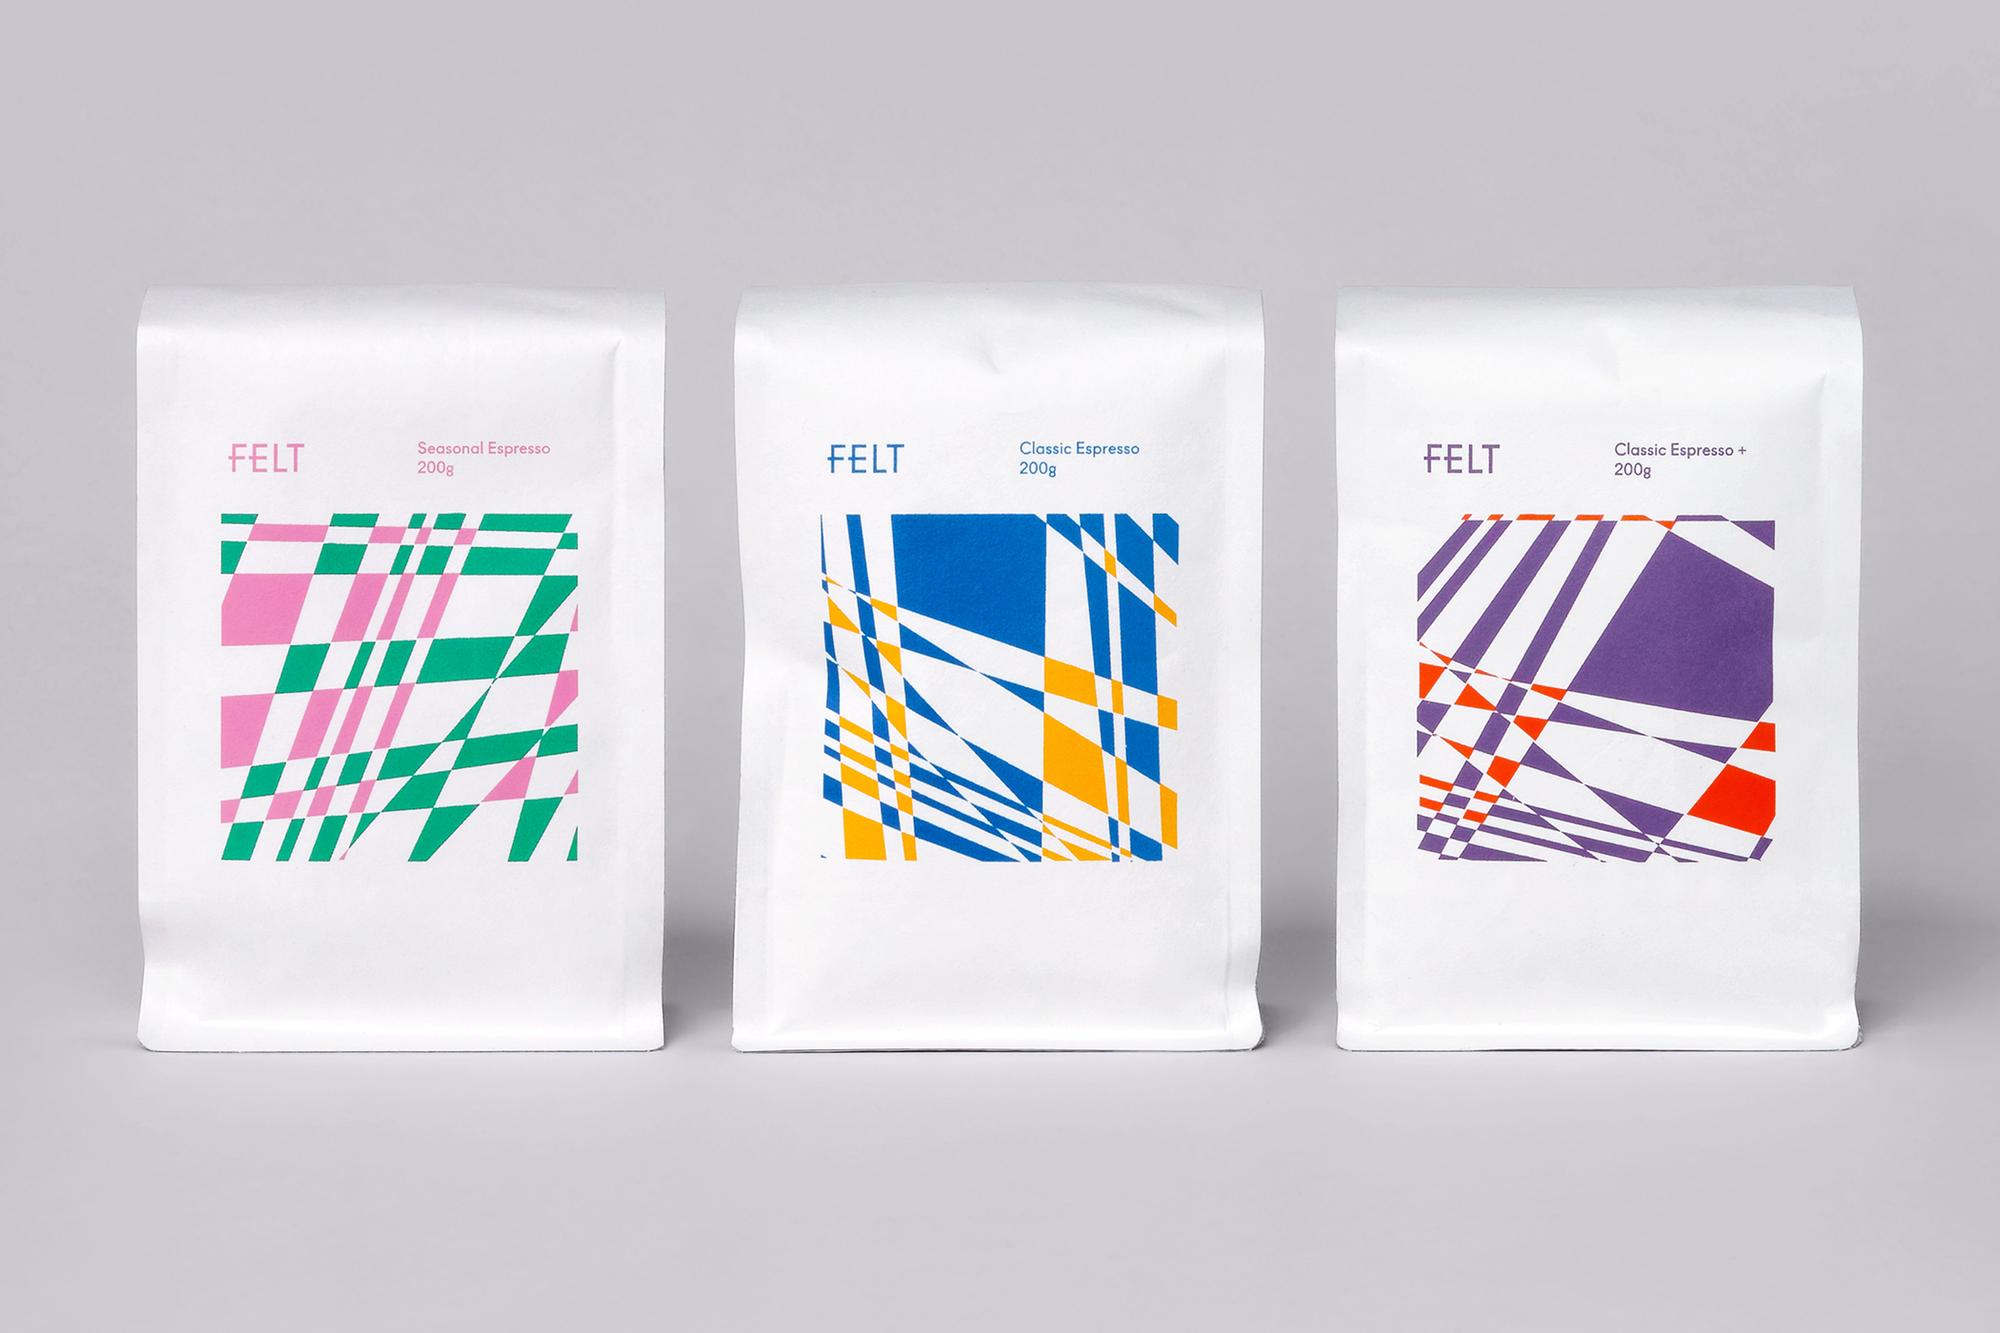 Logotype and packaging design by Studio fnt for South Korean coffee shop and coffee brand Felt